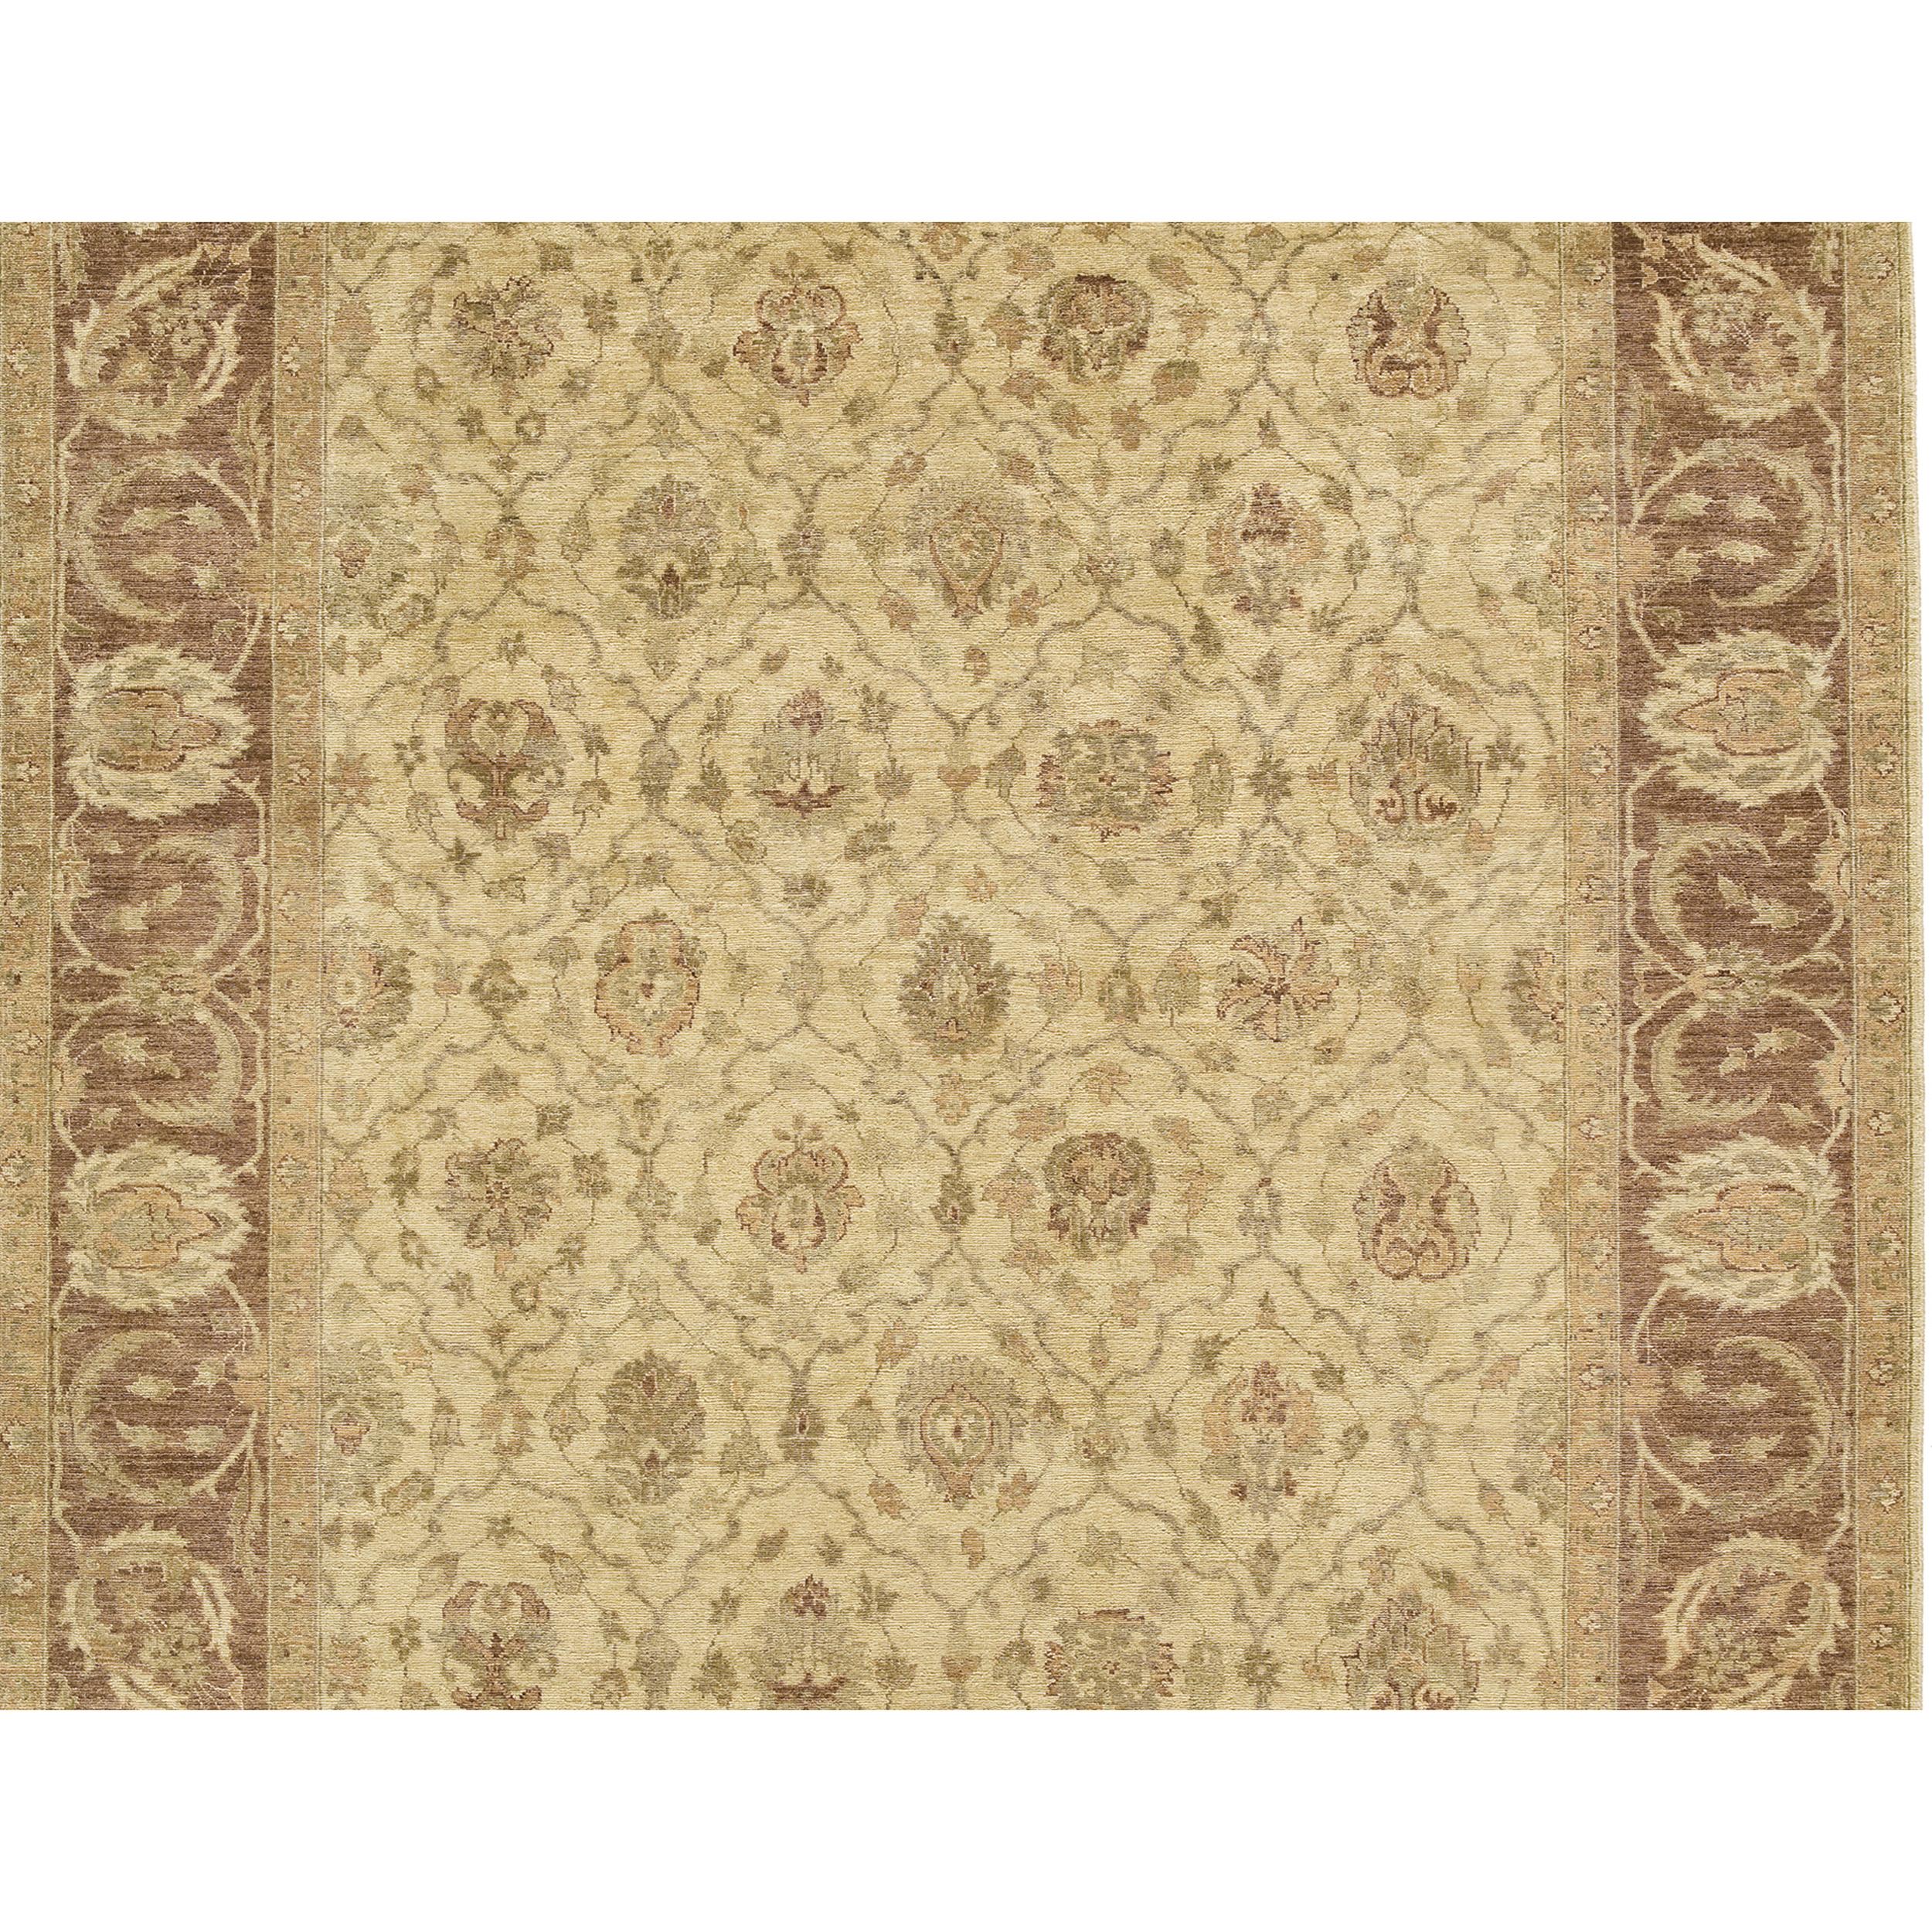 Luxury Traditional Hand-Knotted Tafresh Cream & Birch 12x24 Rug In New Condition For Sale In Secaucus, NJ